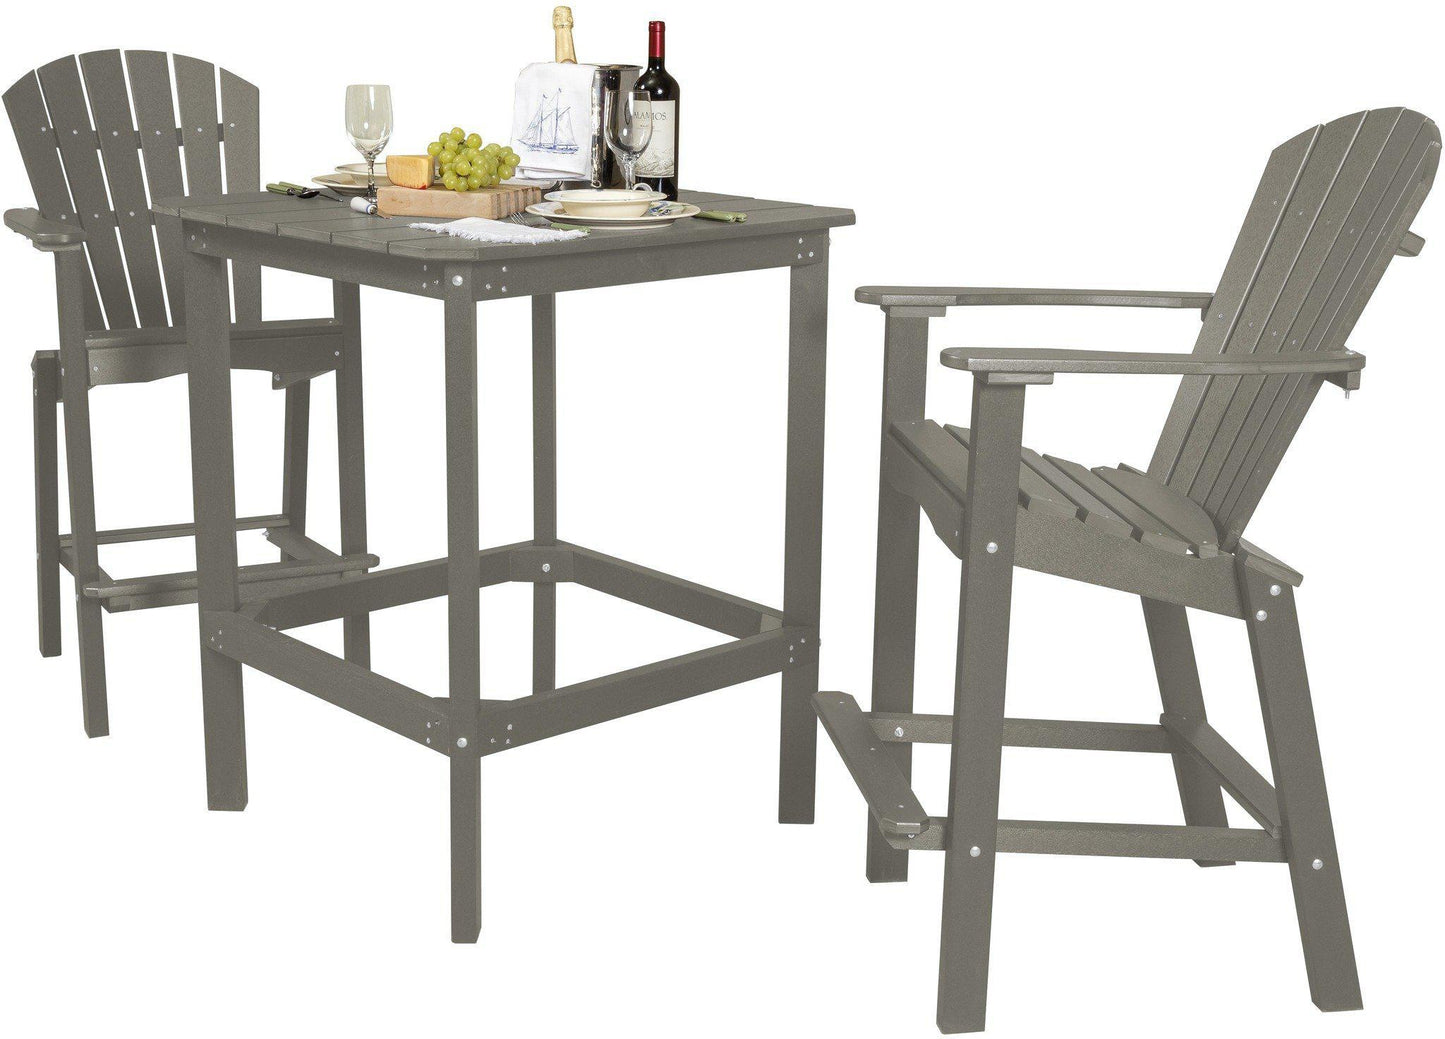 Wildridge Recycled Plastic Classic 42” High Dining Table Set with 2 (30” High) Dining Chairs - LEAD TIME TO SHIP 6 WEEKS OR LESS